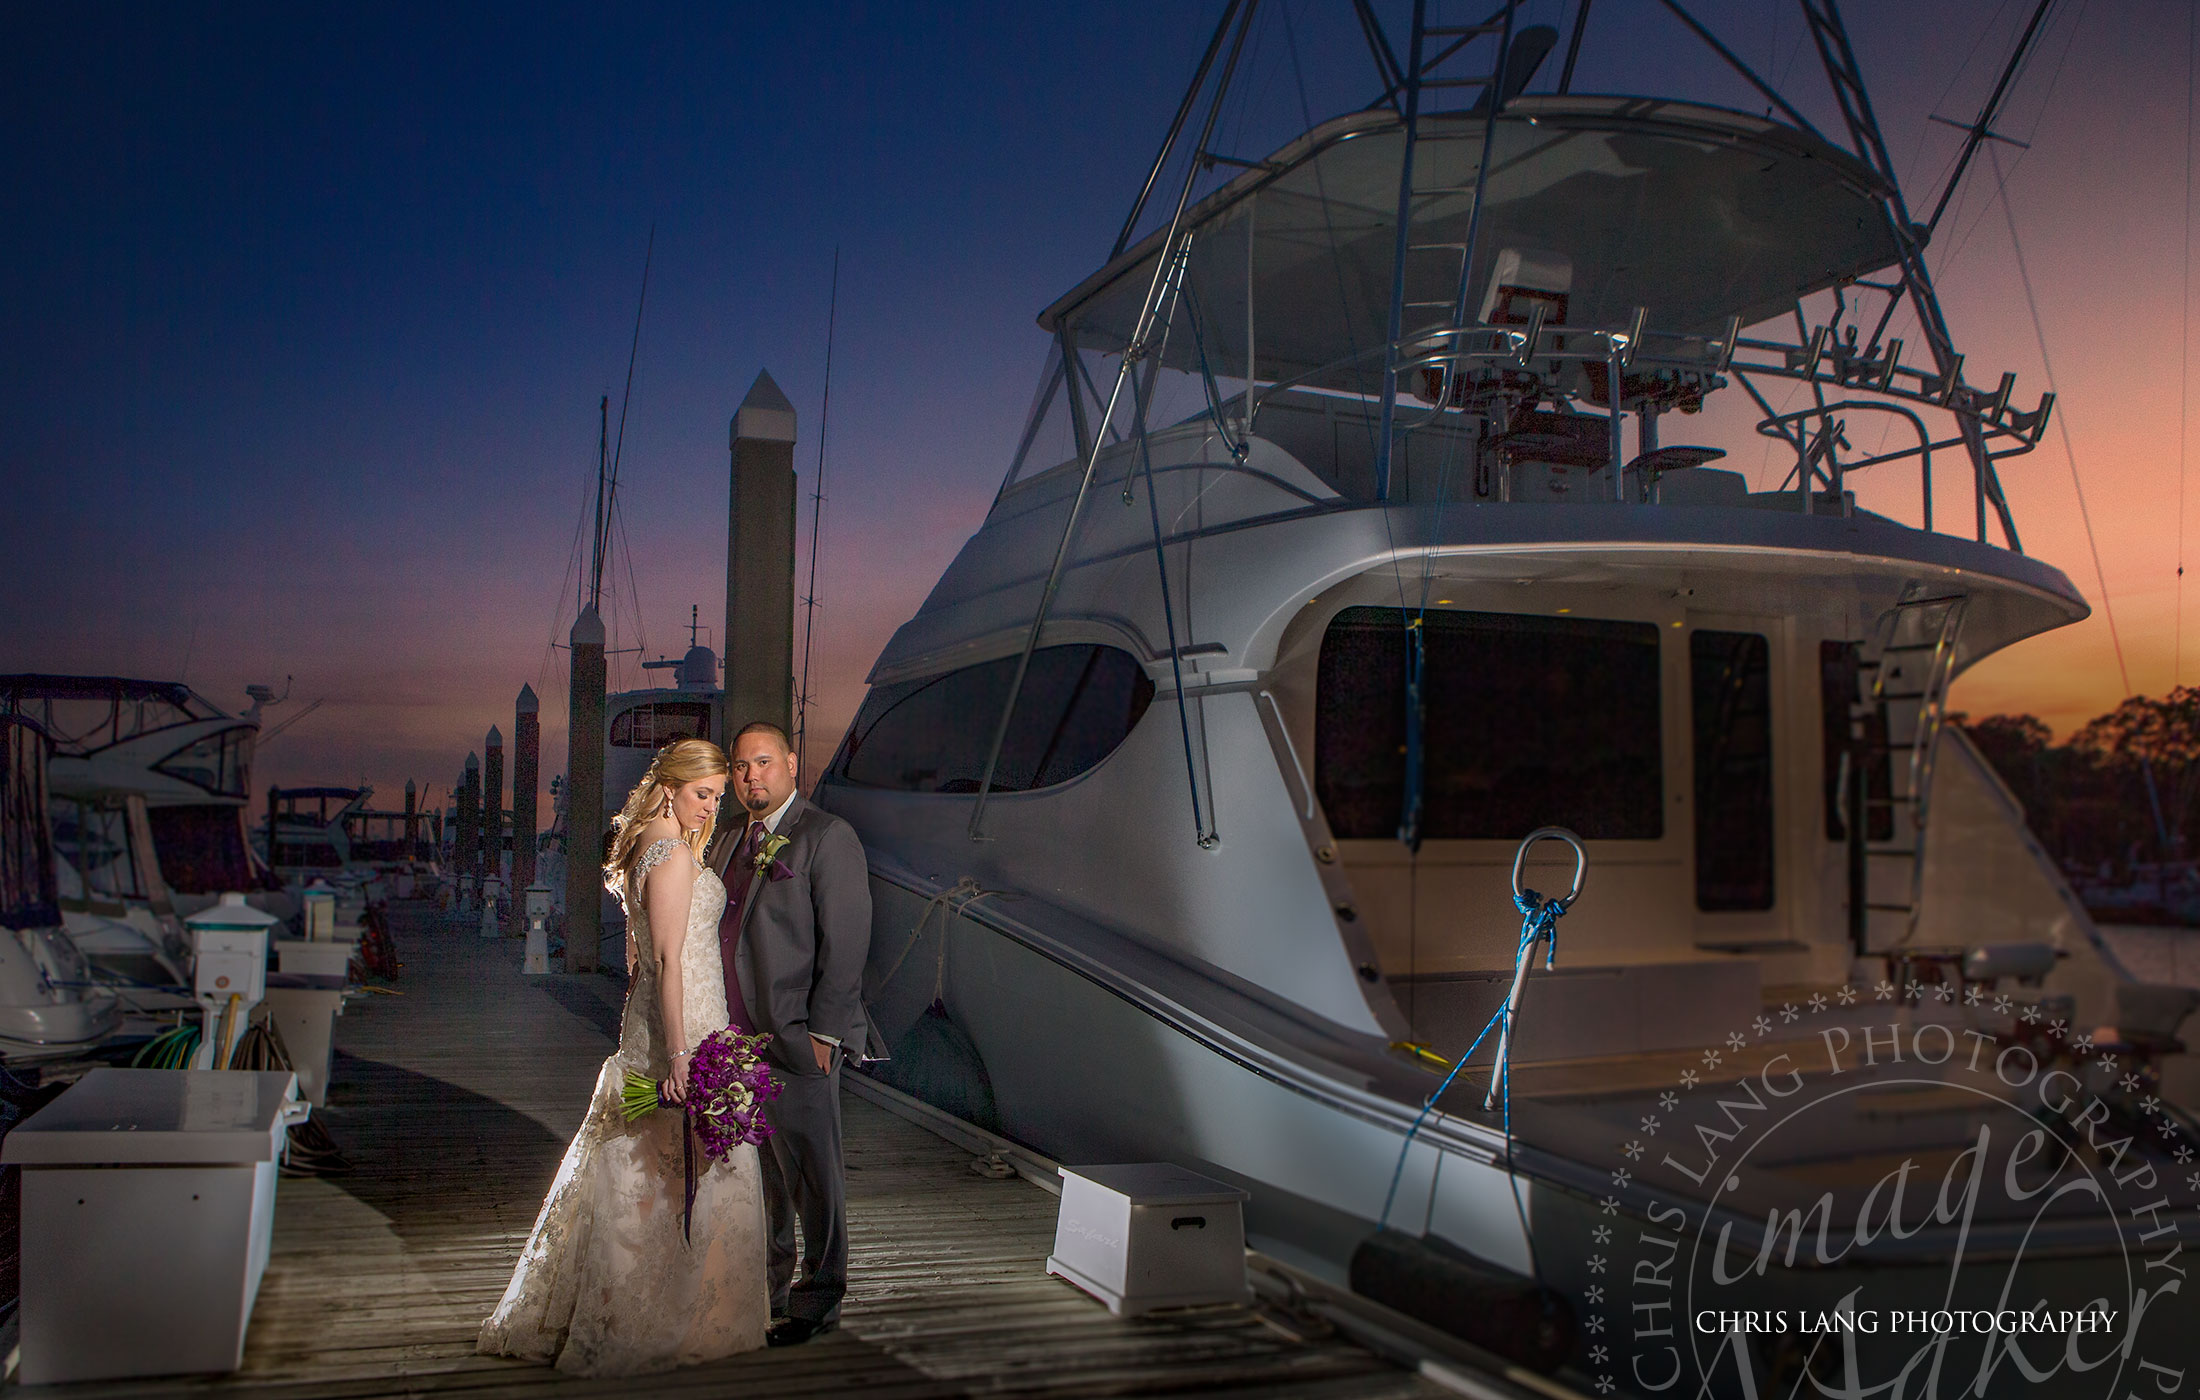 Blue Water gfrill - Wedding picture - Wrightsville Beach - wedding & event venue - Chris Lang Photography